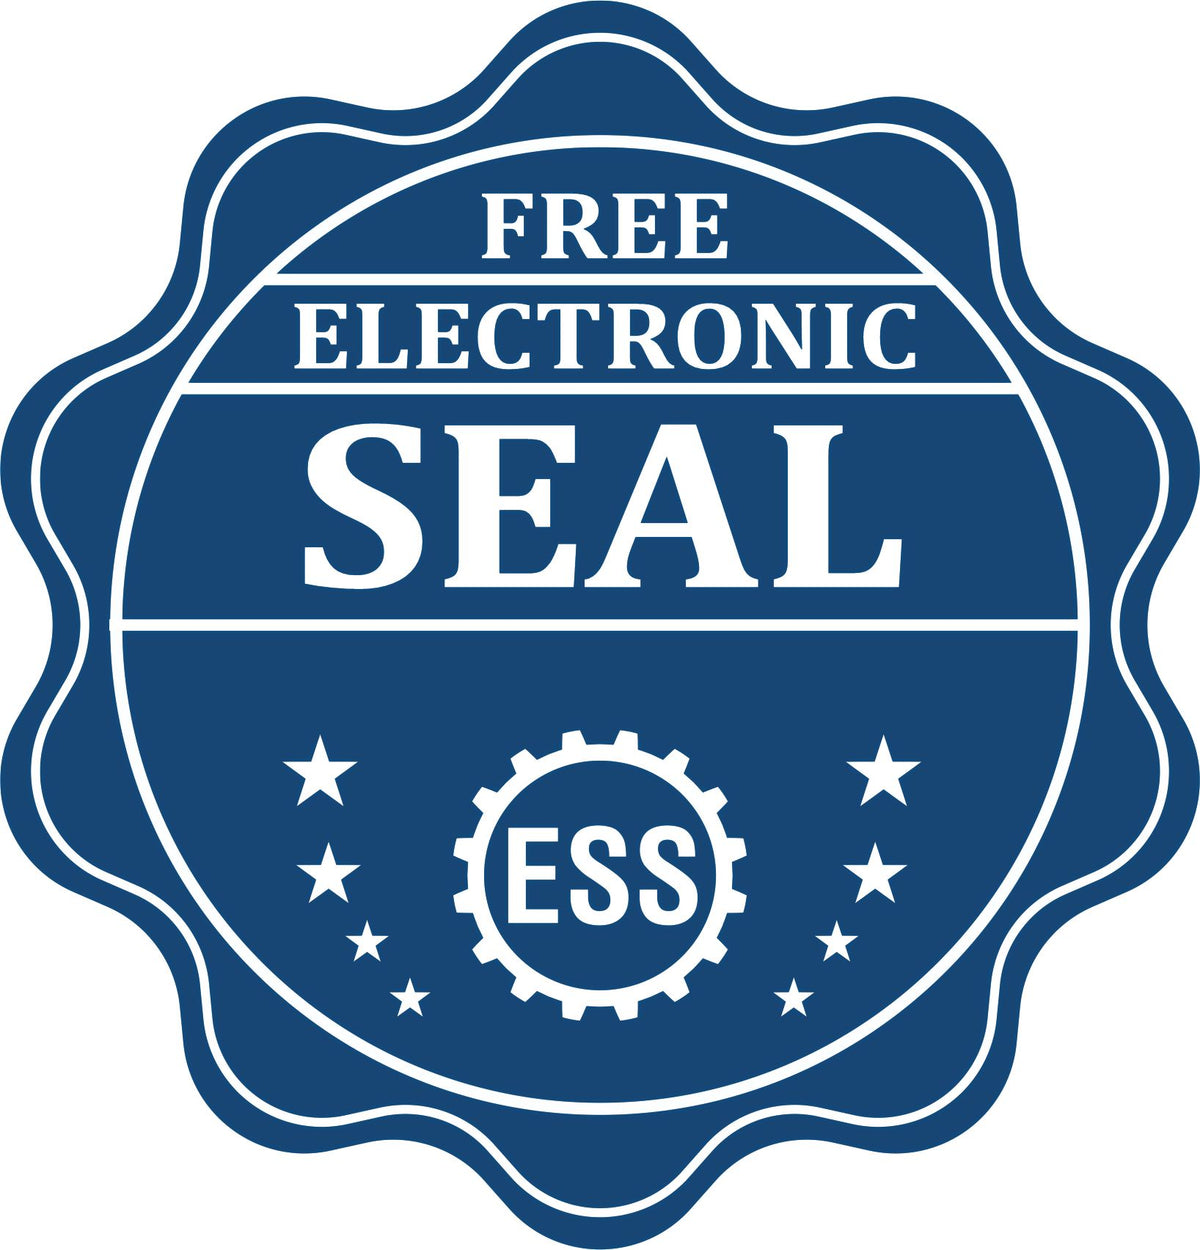 A badge showing a free electronic seal for the Hybrid Illinois Landscape Architect Seal with stars and the ESS gear on the emblem.